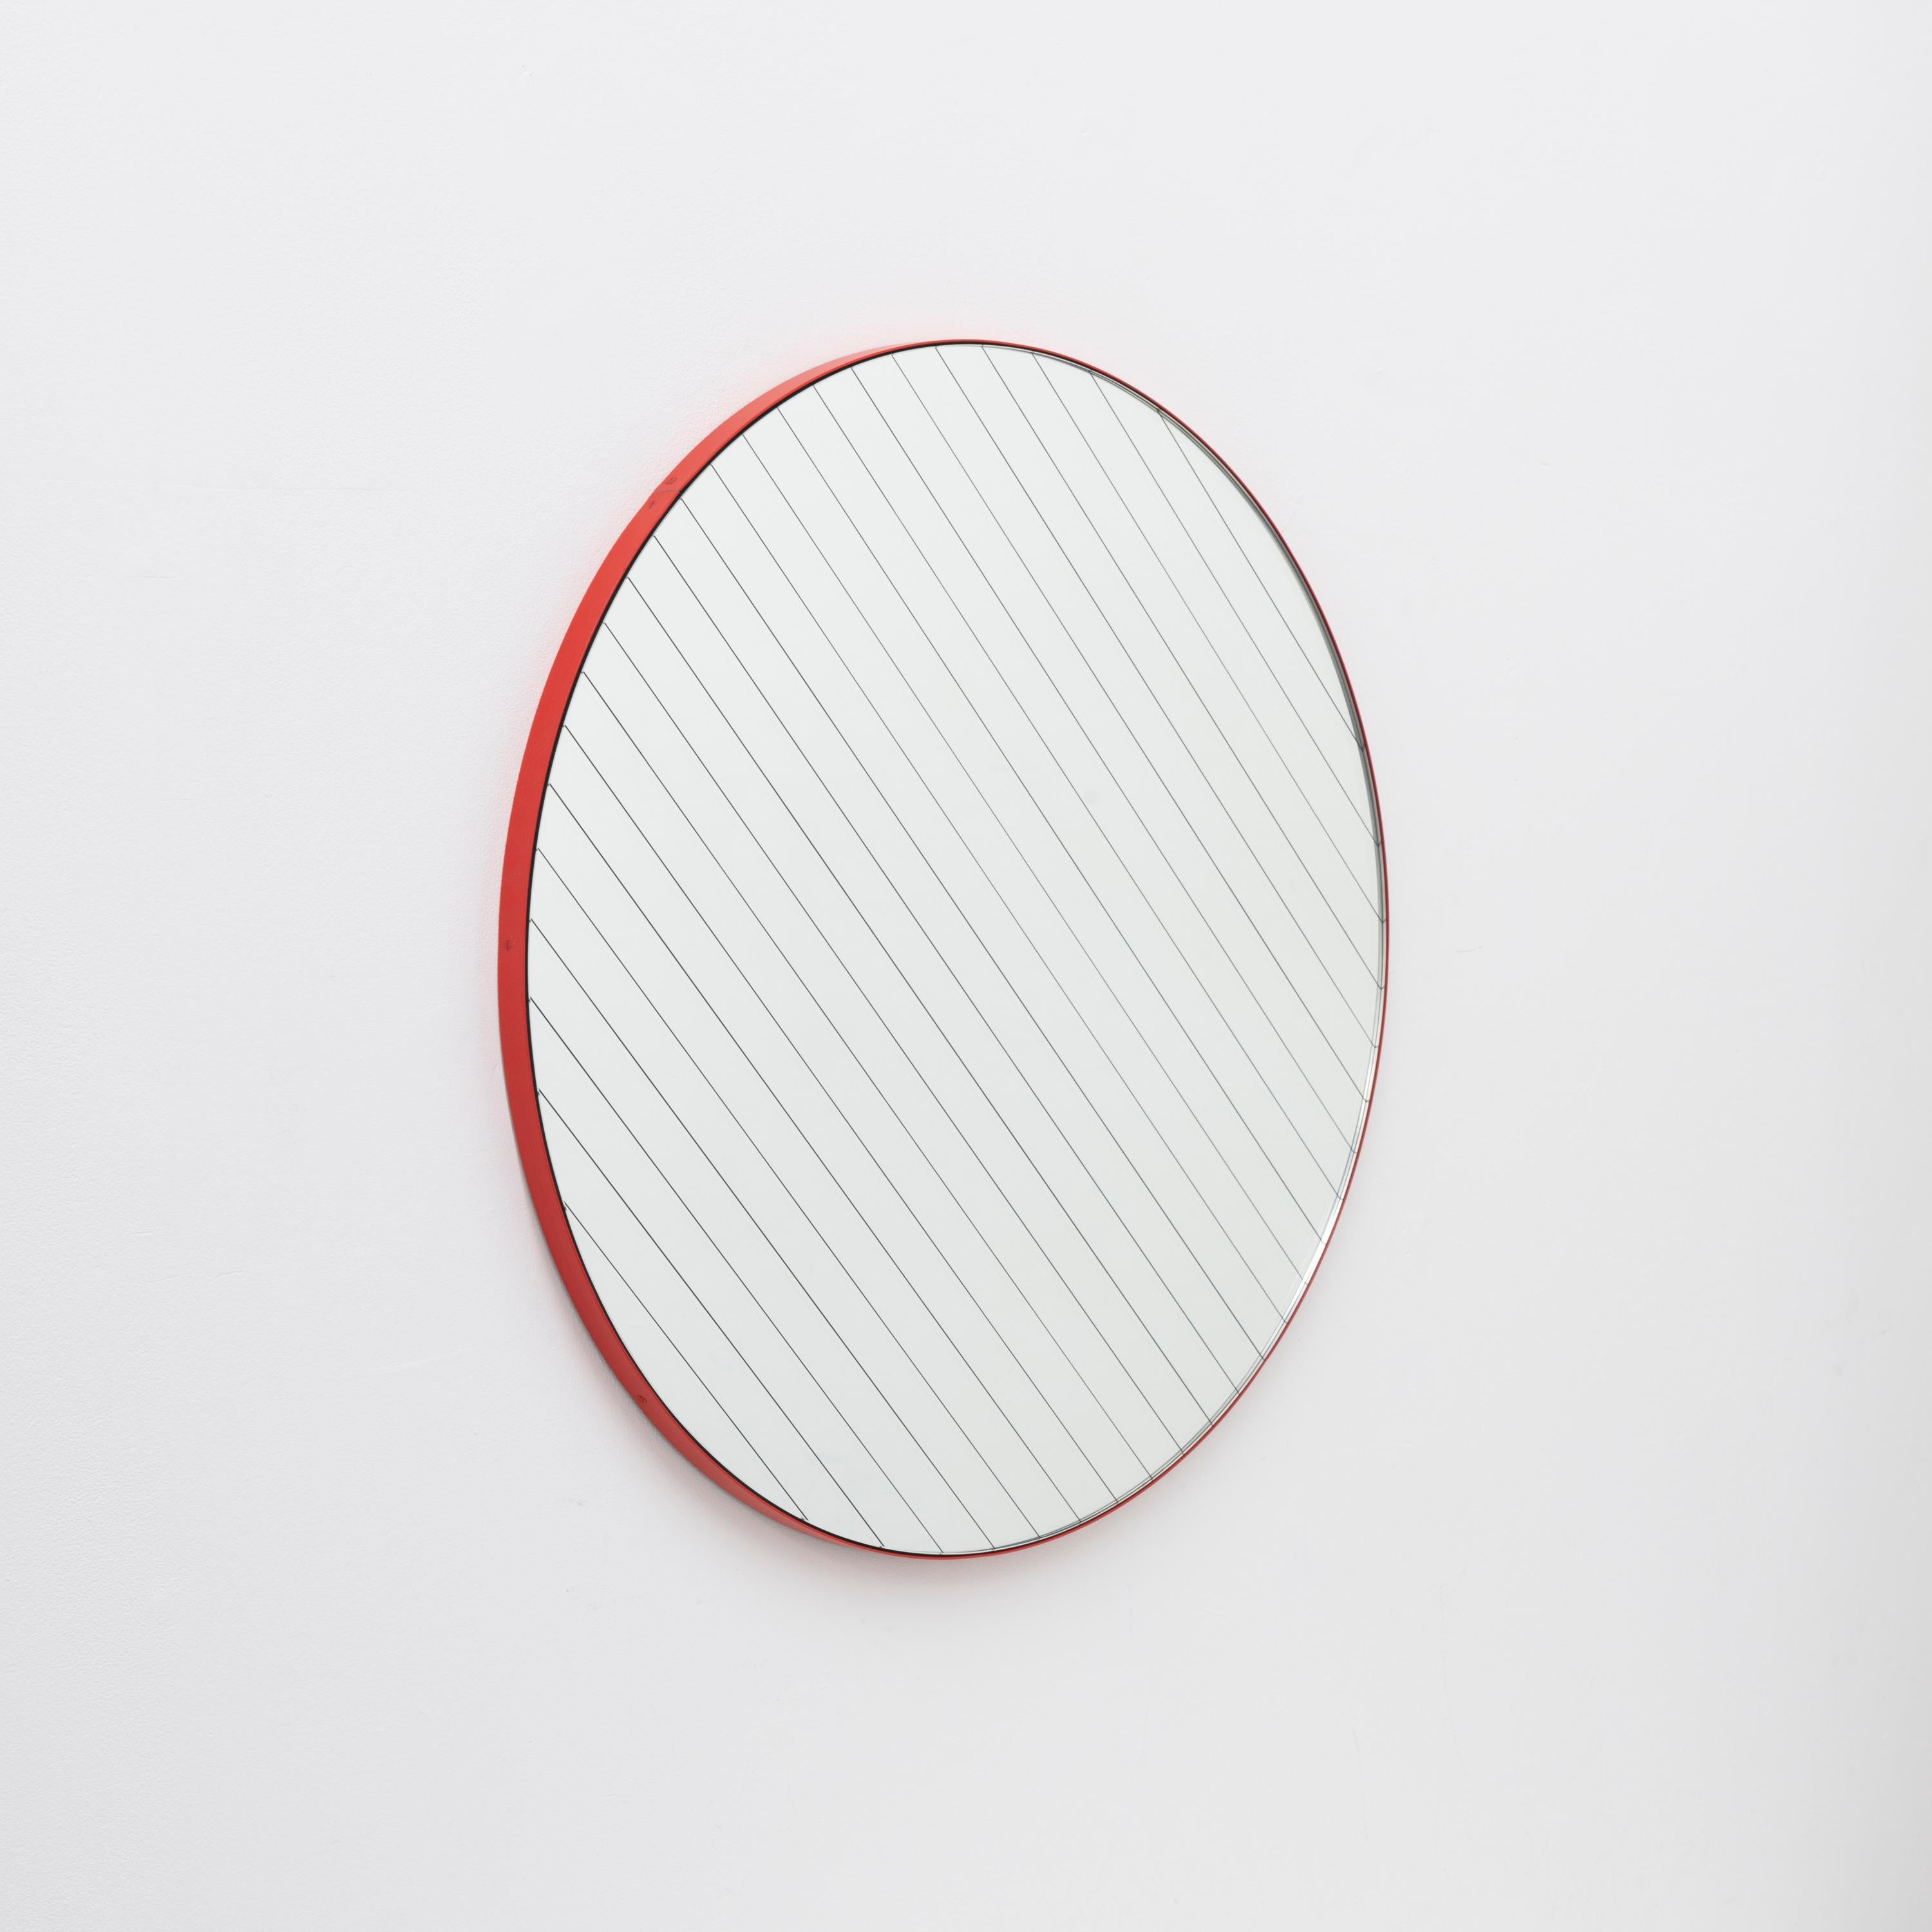 Organic Modern Orbis Linus Round Contemporary Sandblasted Mirror with Strips and Red Frame, XL